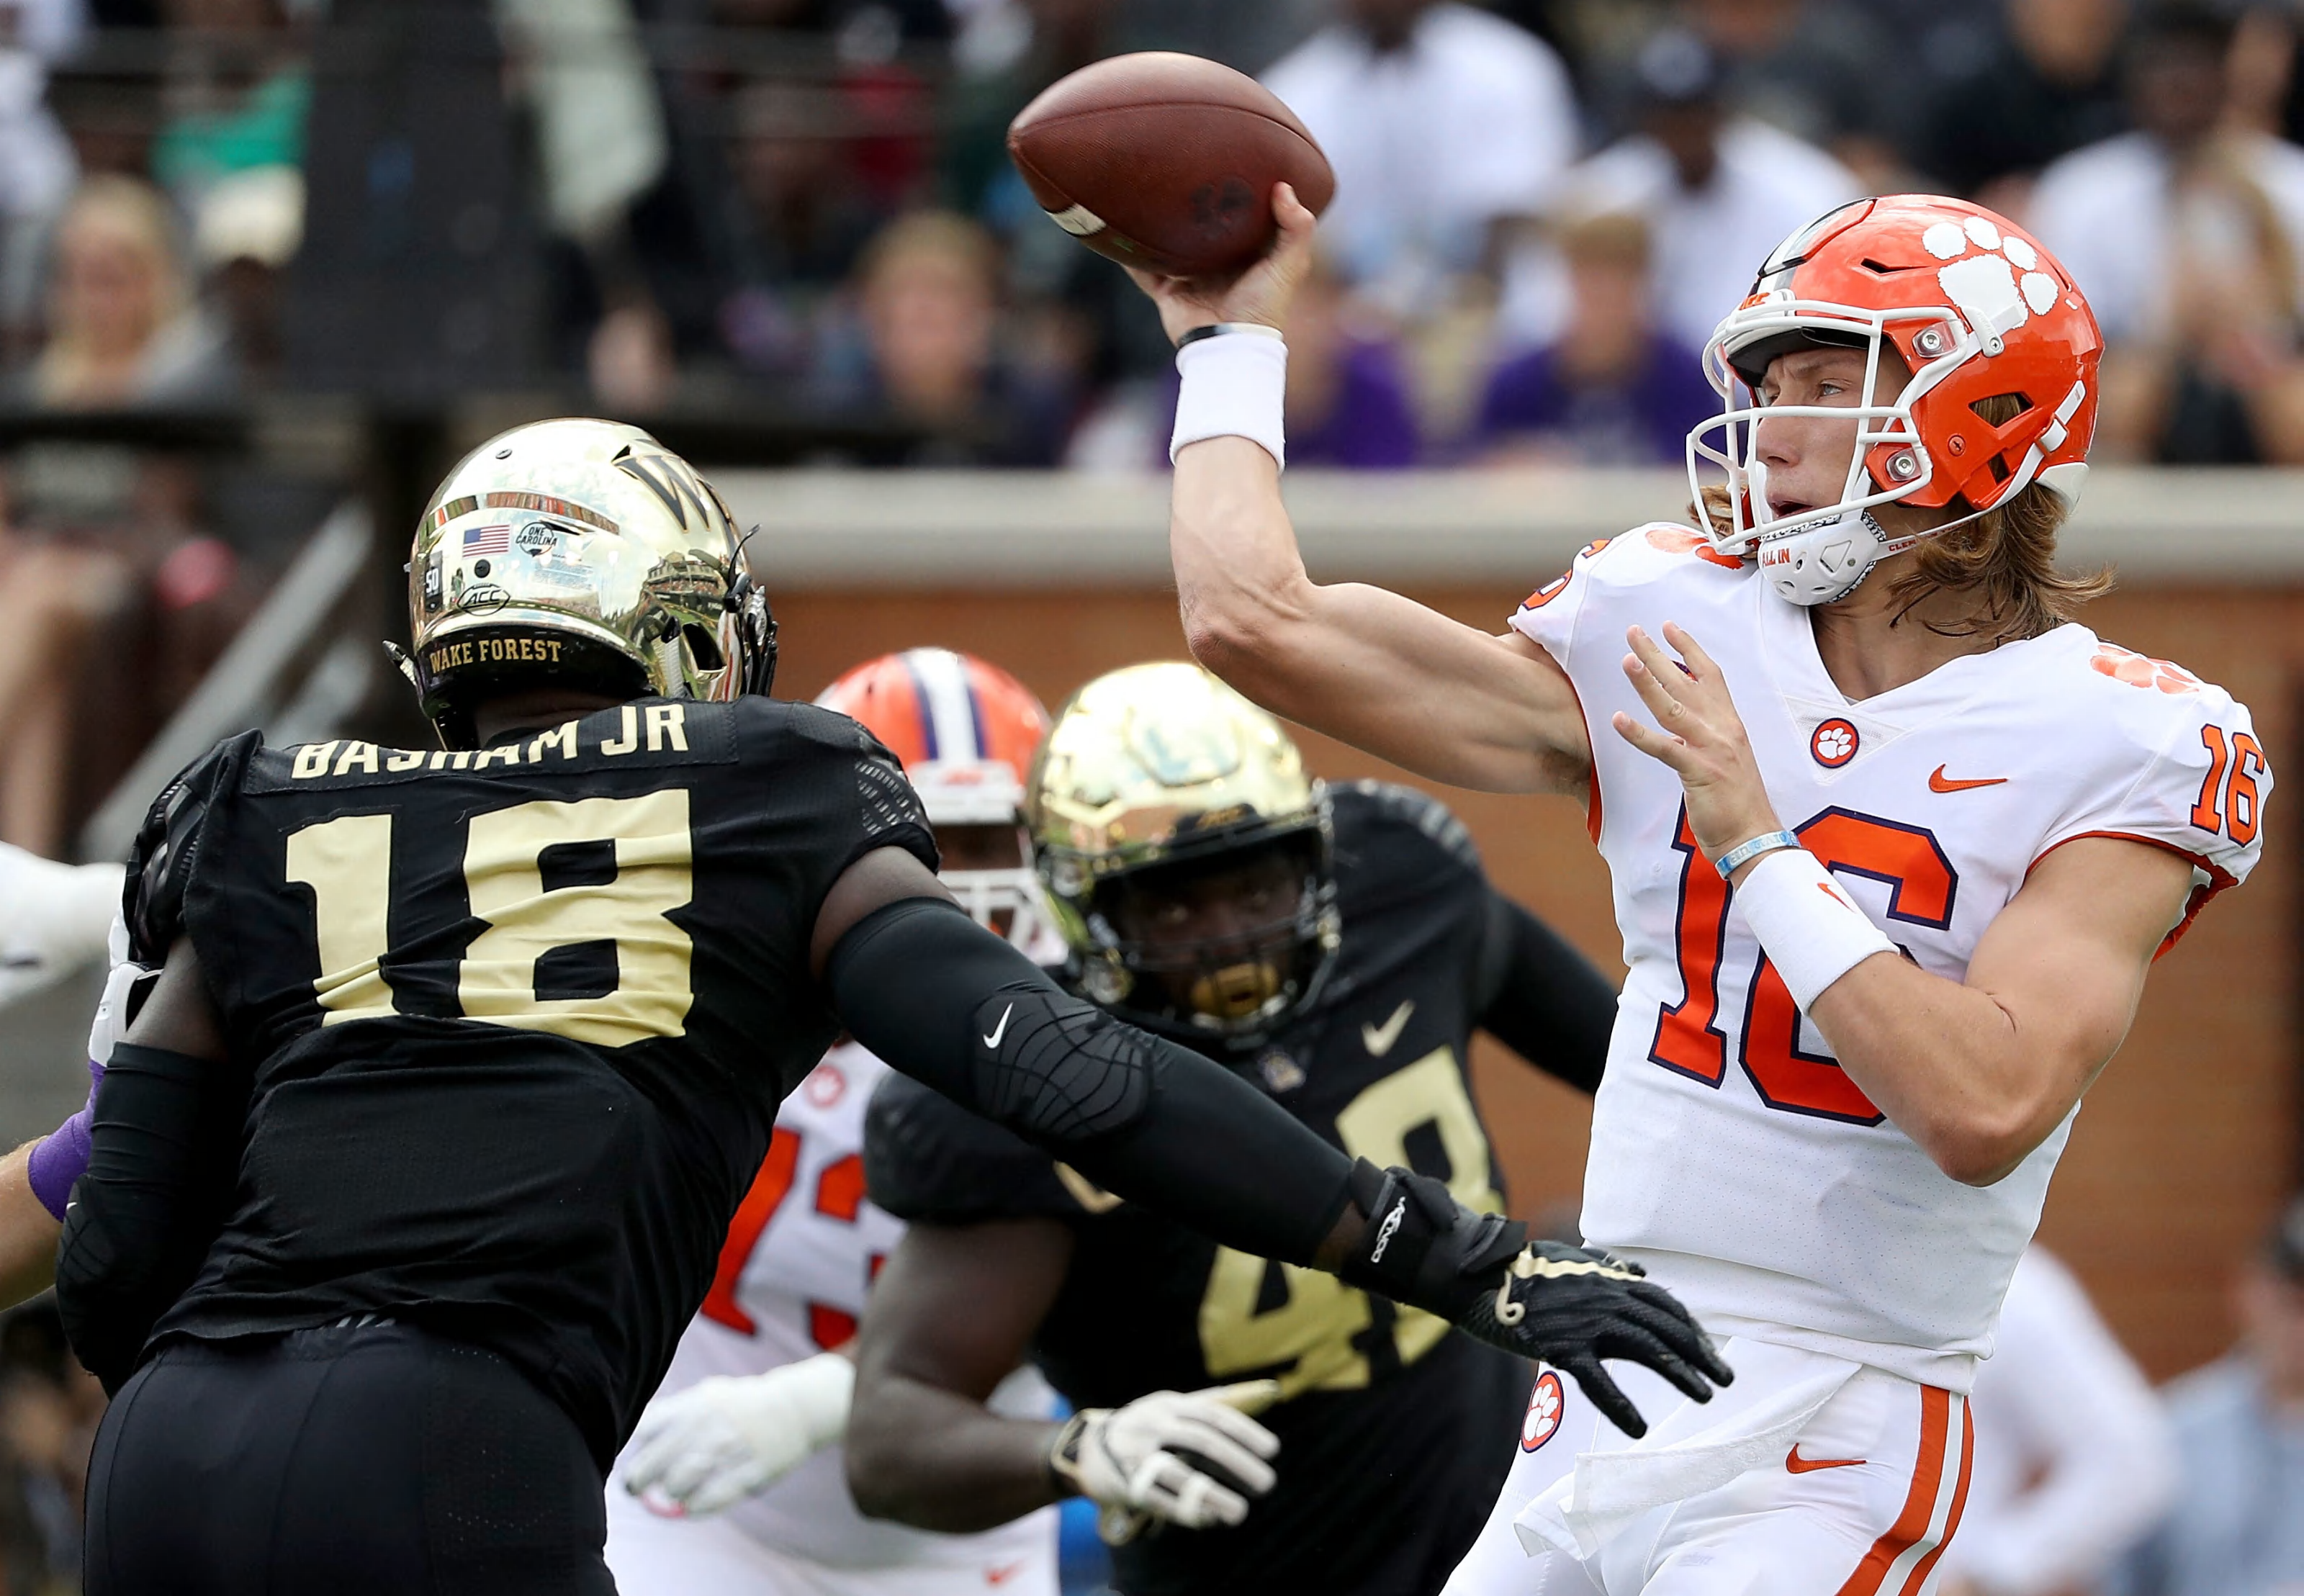 Wake Forest Football: Key takeaways from the loss to Clemson - Page 2